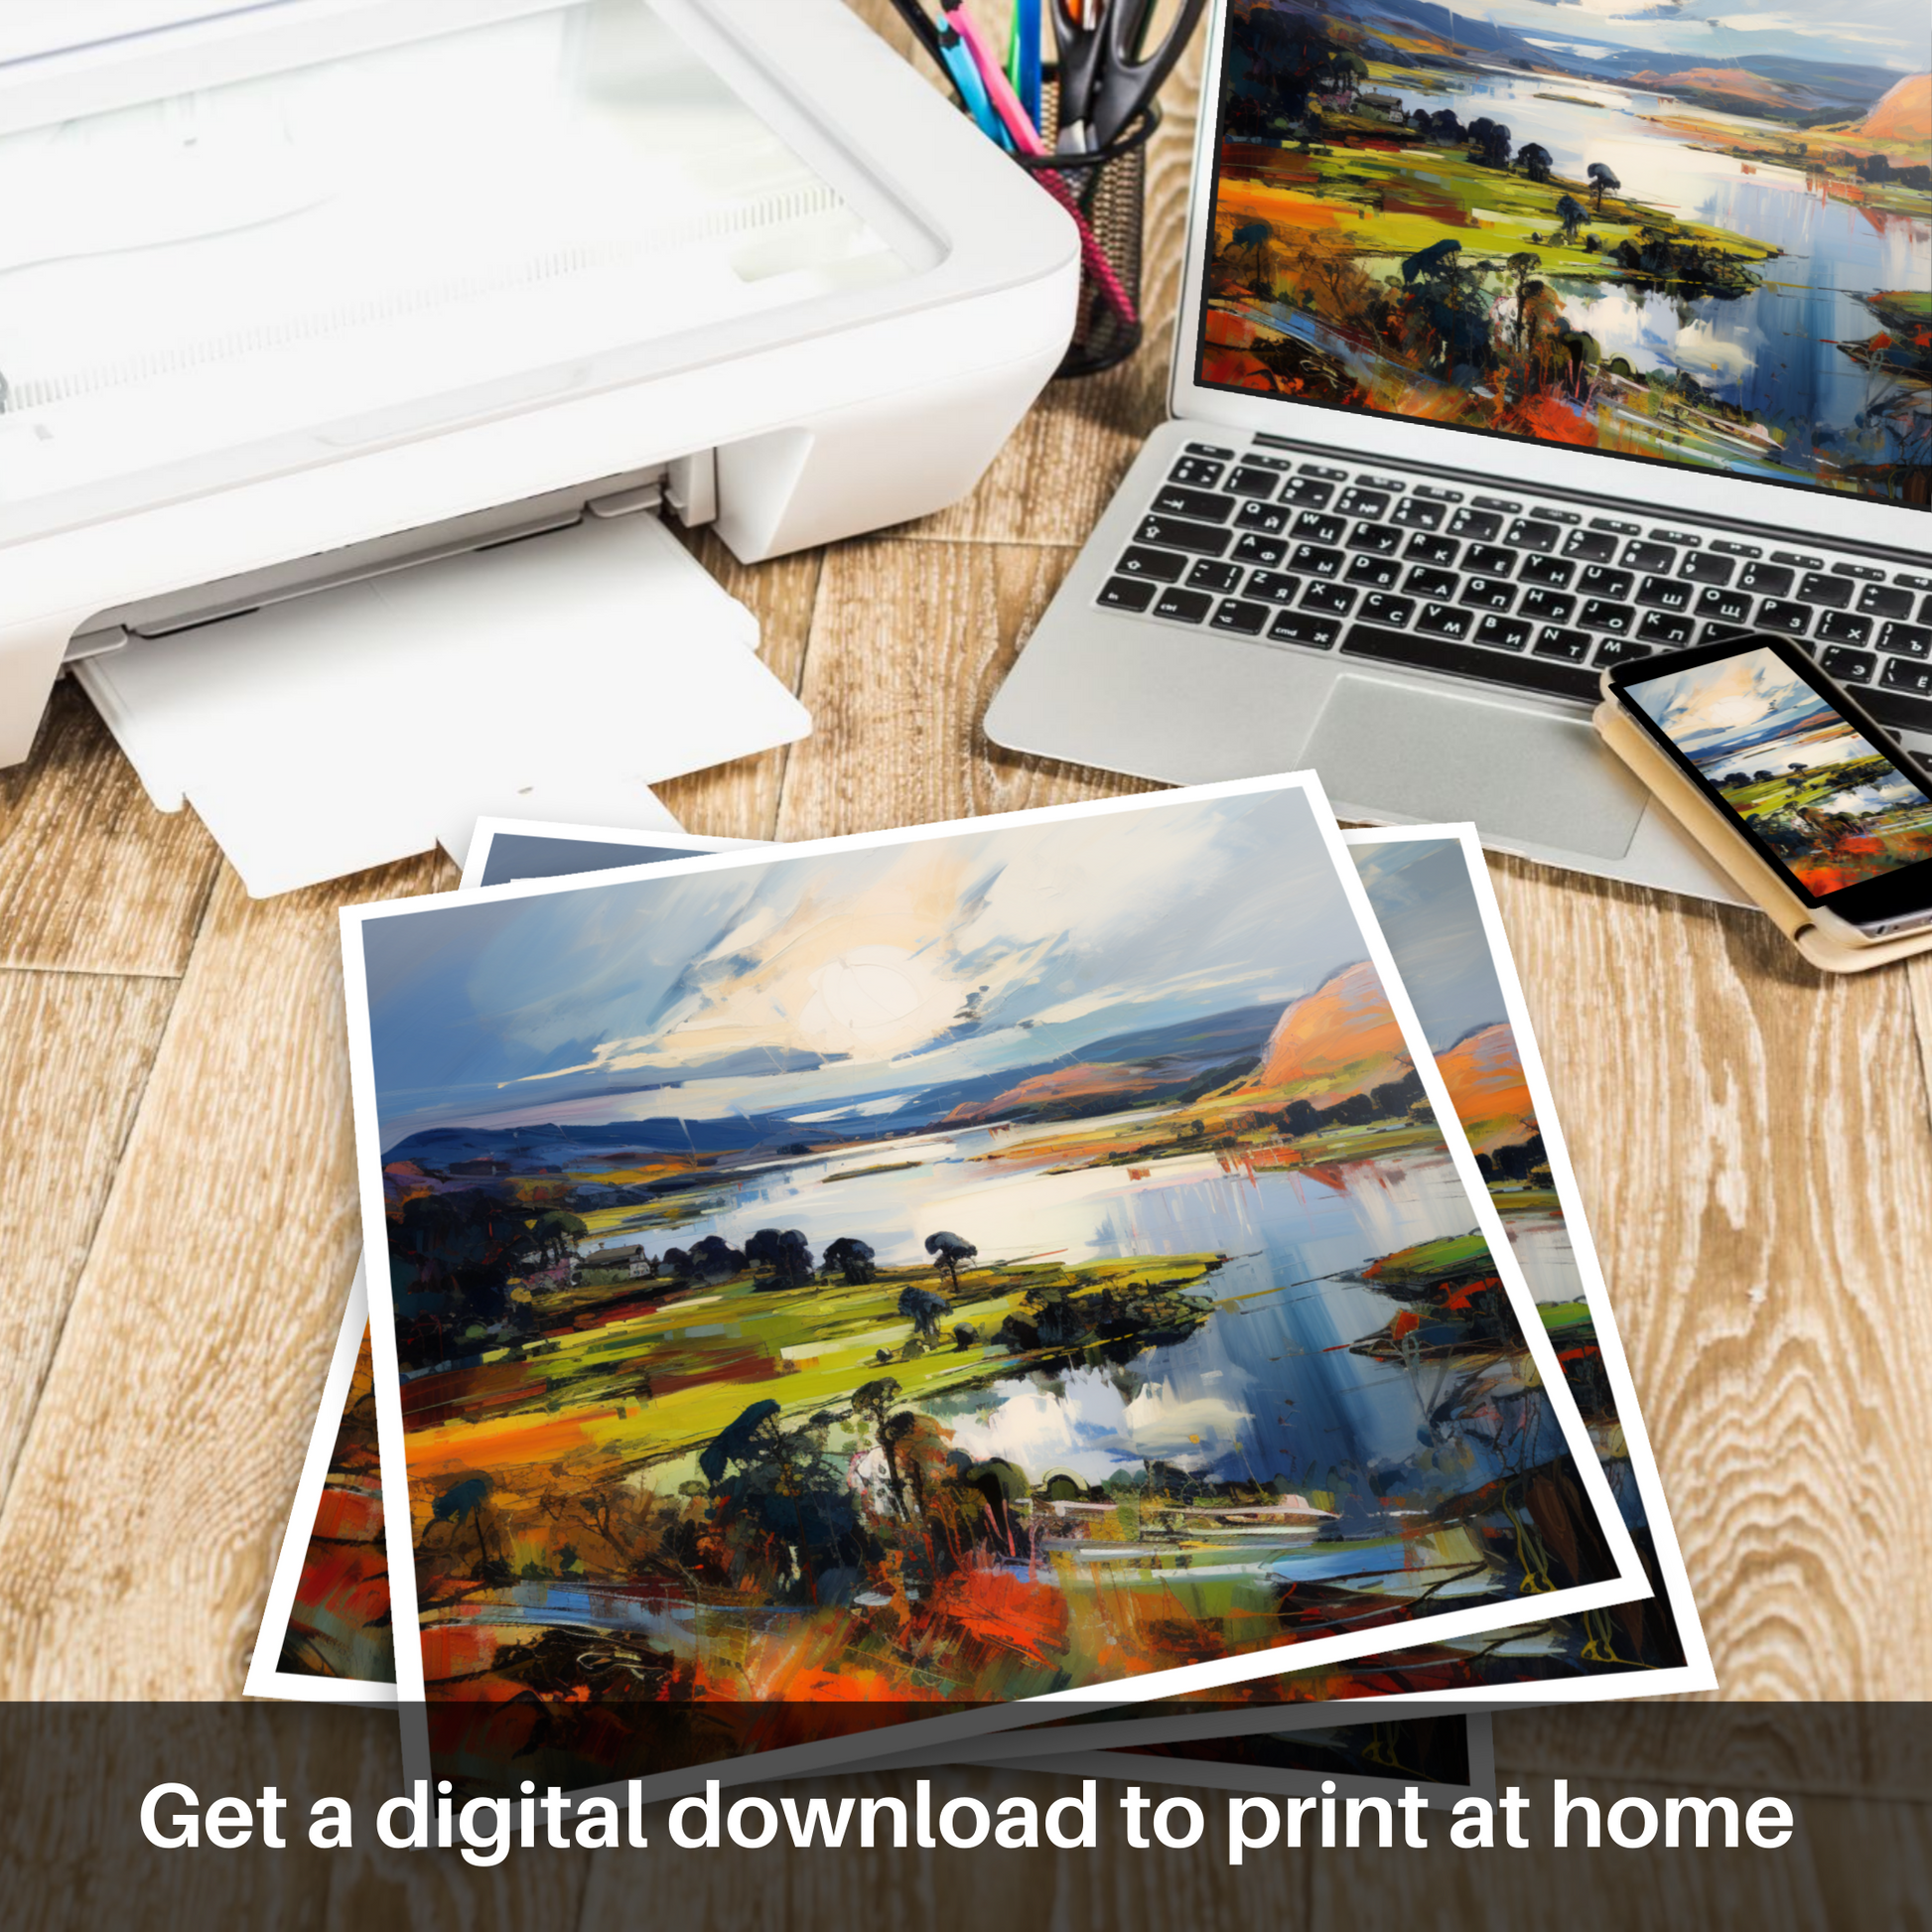 Downloadable and printable picture of Loch Leven, Perth and Kinross